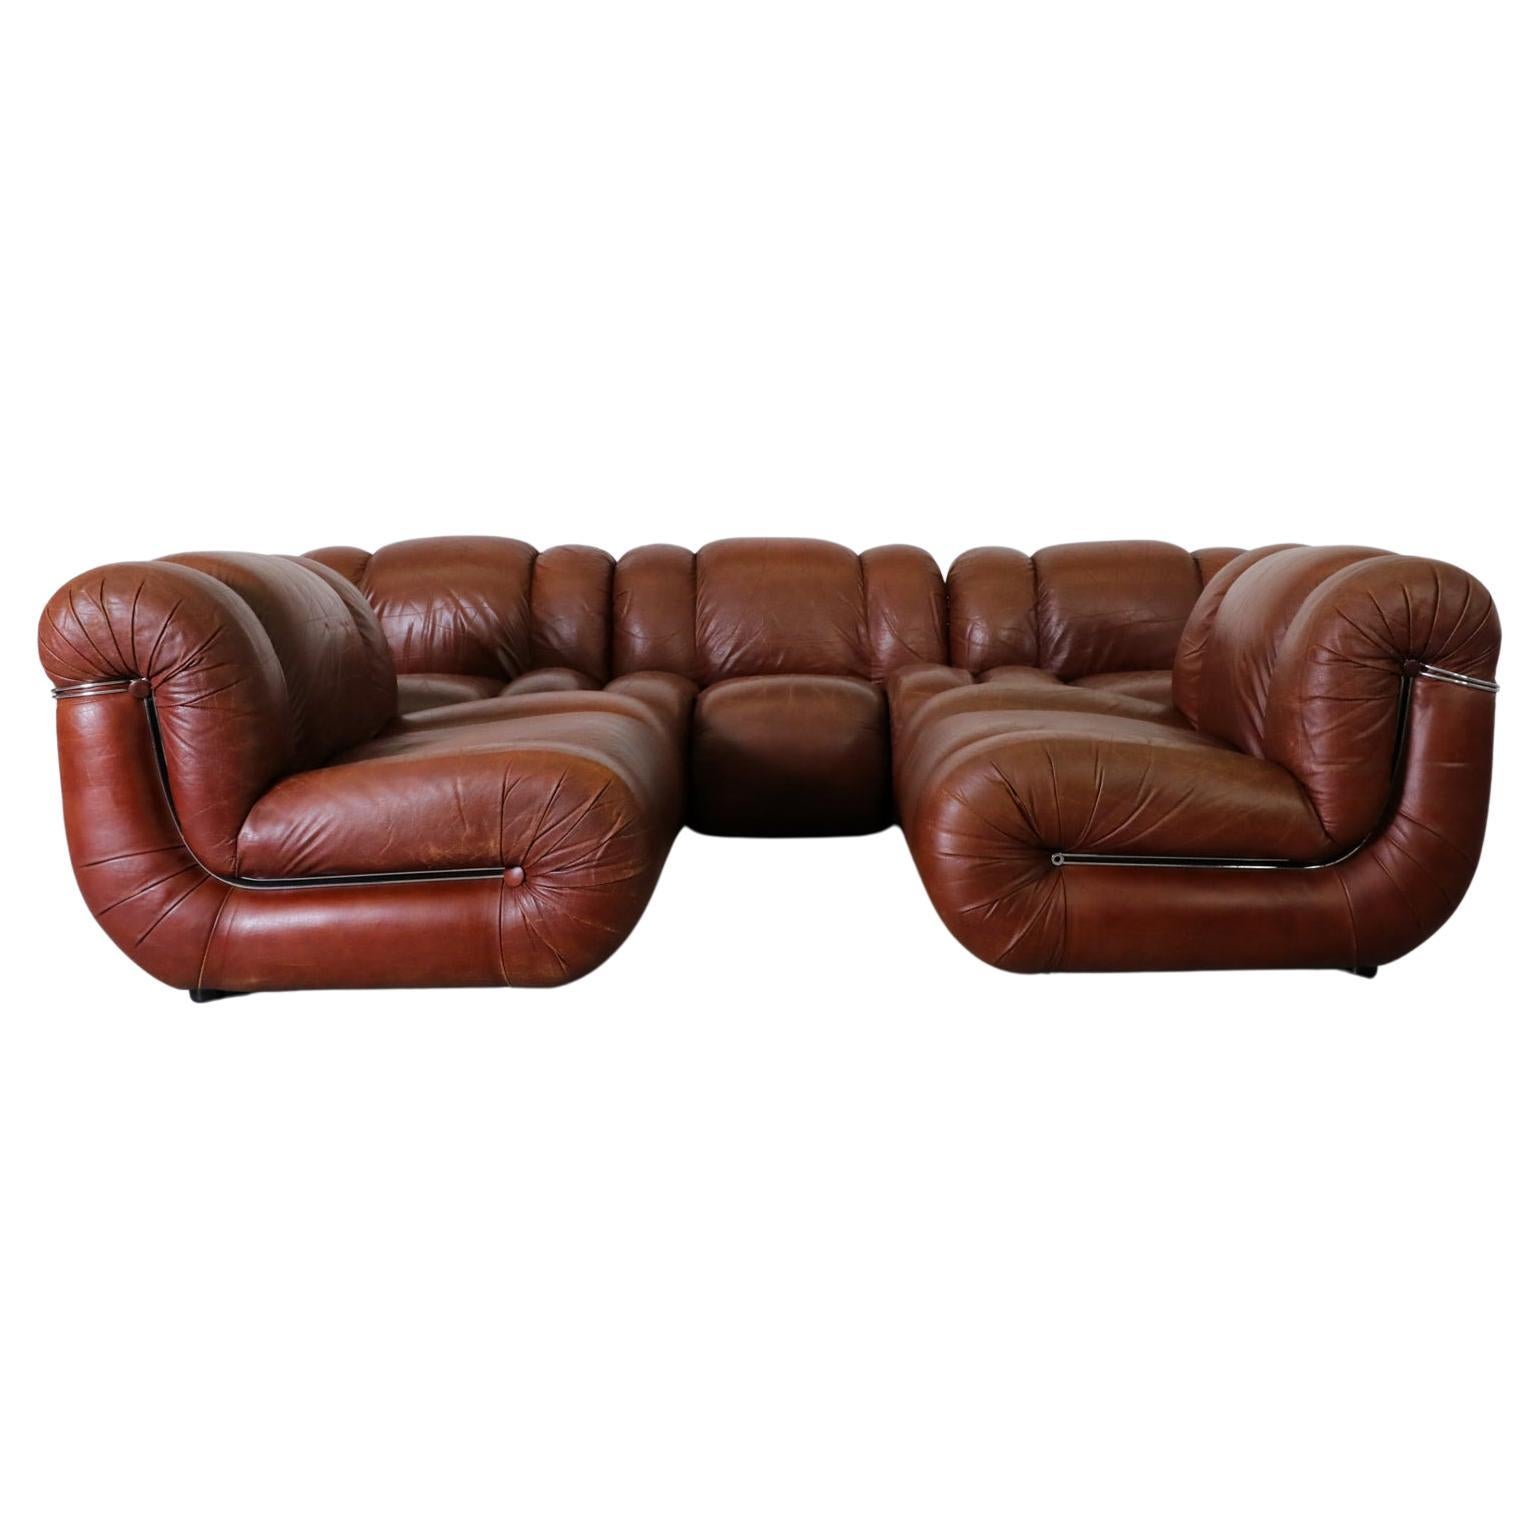 Mimo Padova Velasquez Modular Sofa In Brown Leather And Chrome, Italy 1970s